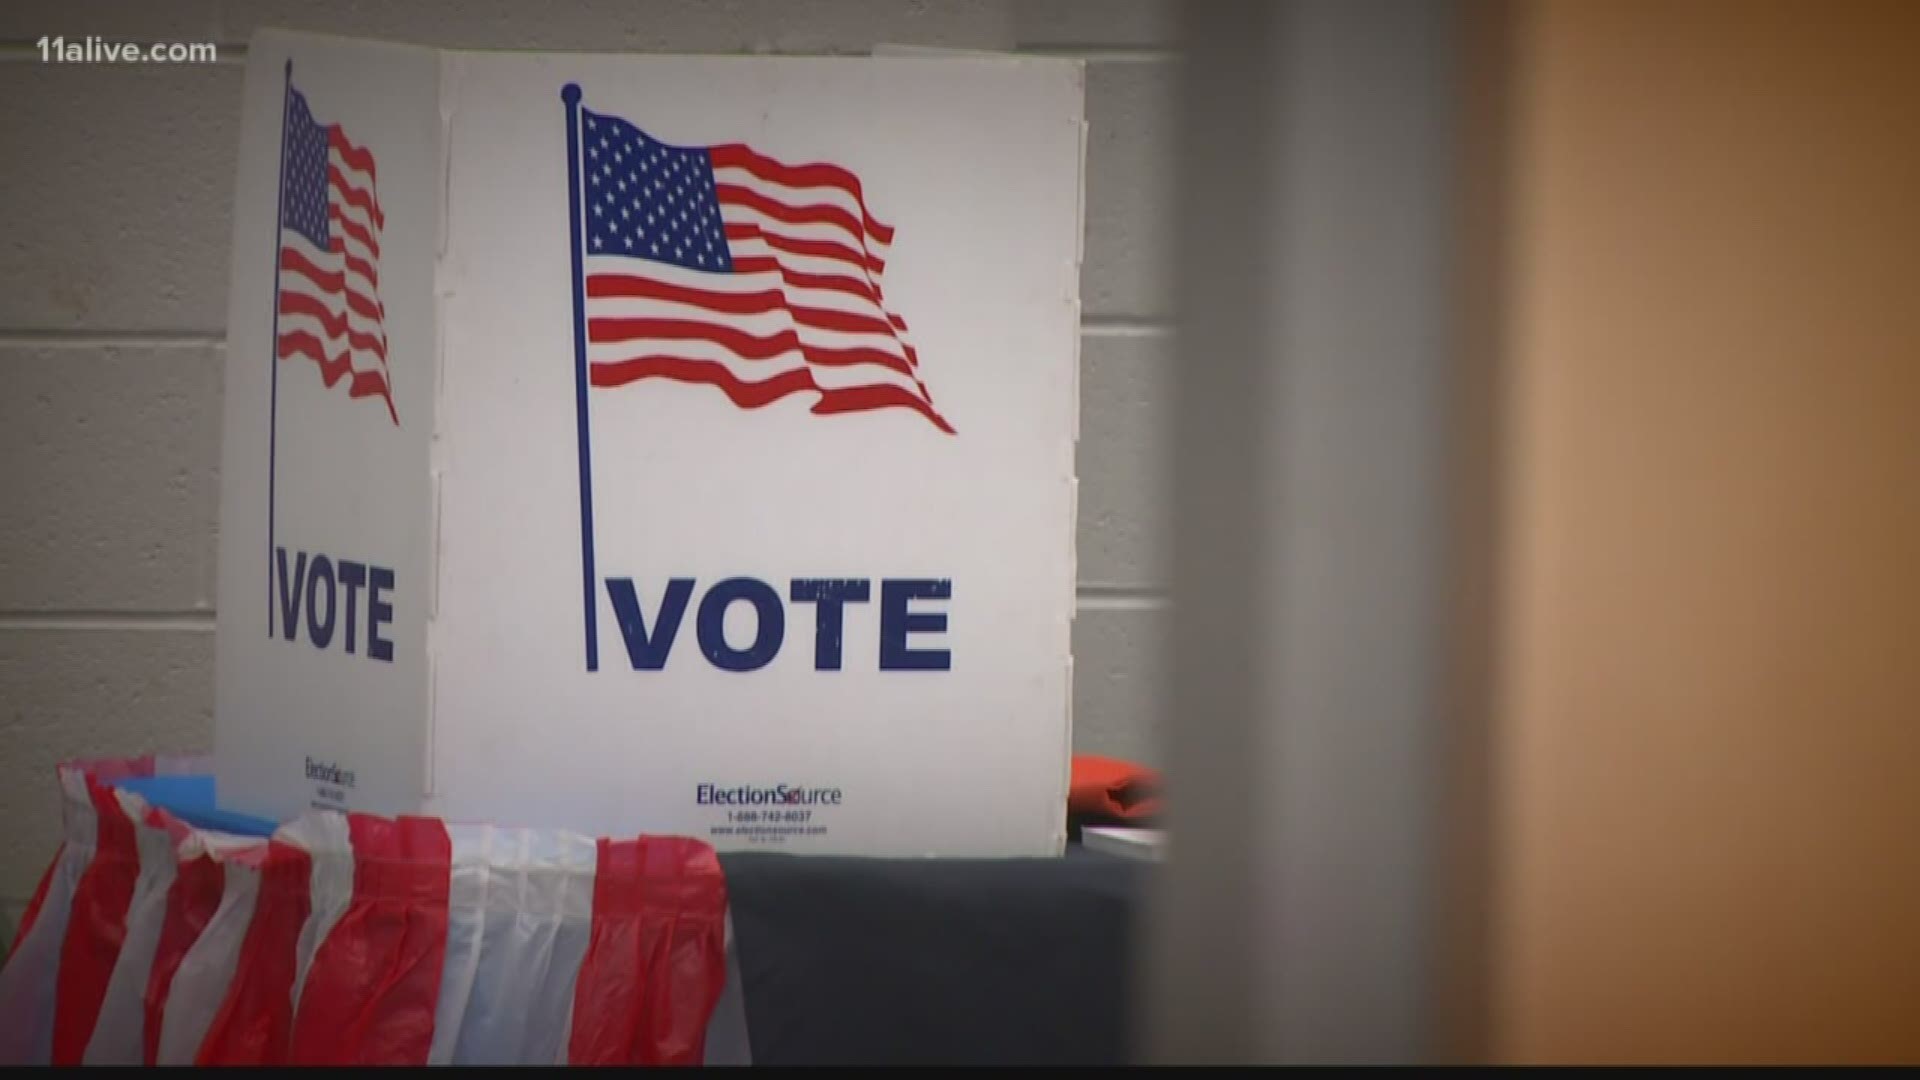 According to the federal lawsuit, absentee voters are not notified of problems with their ballots in a standard way or given enough time to correct them.